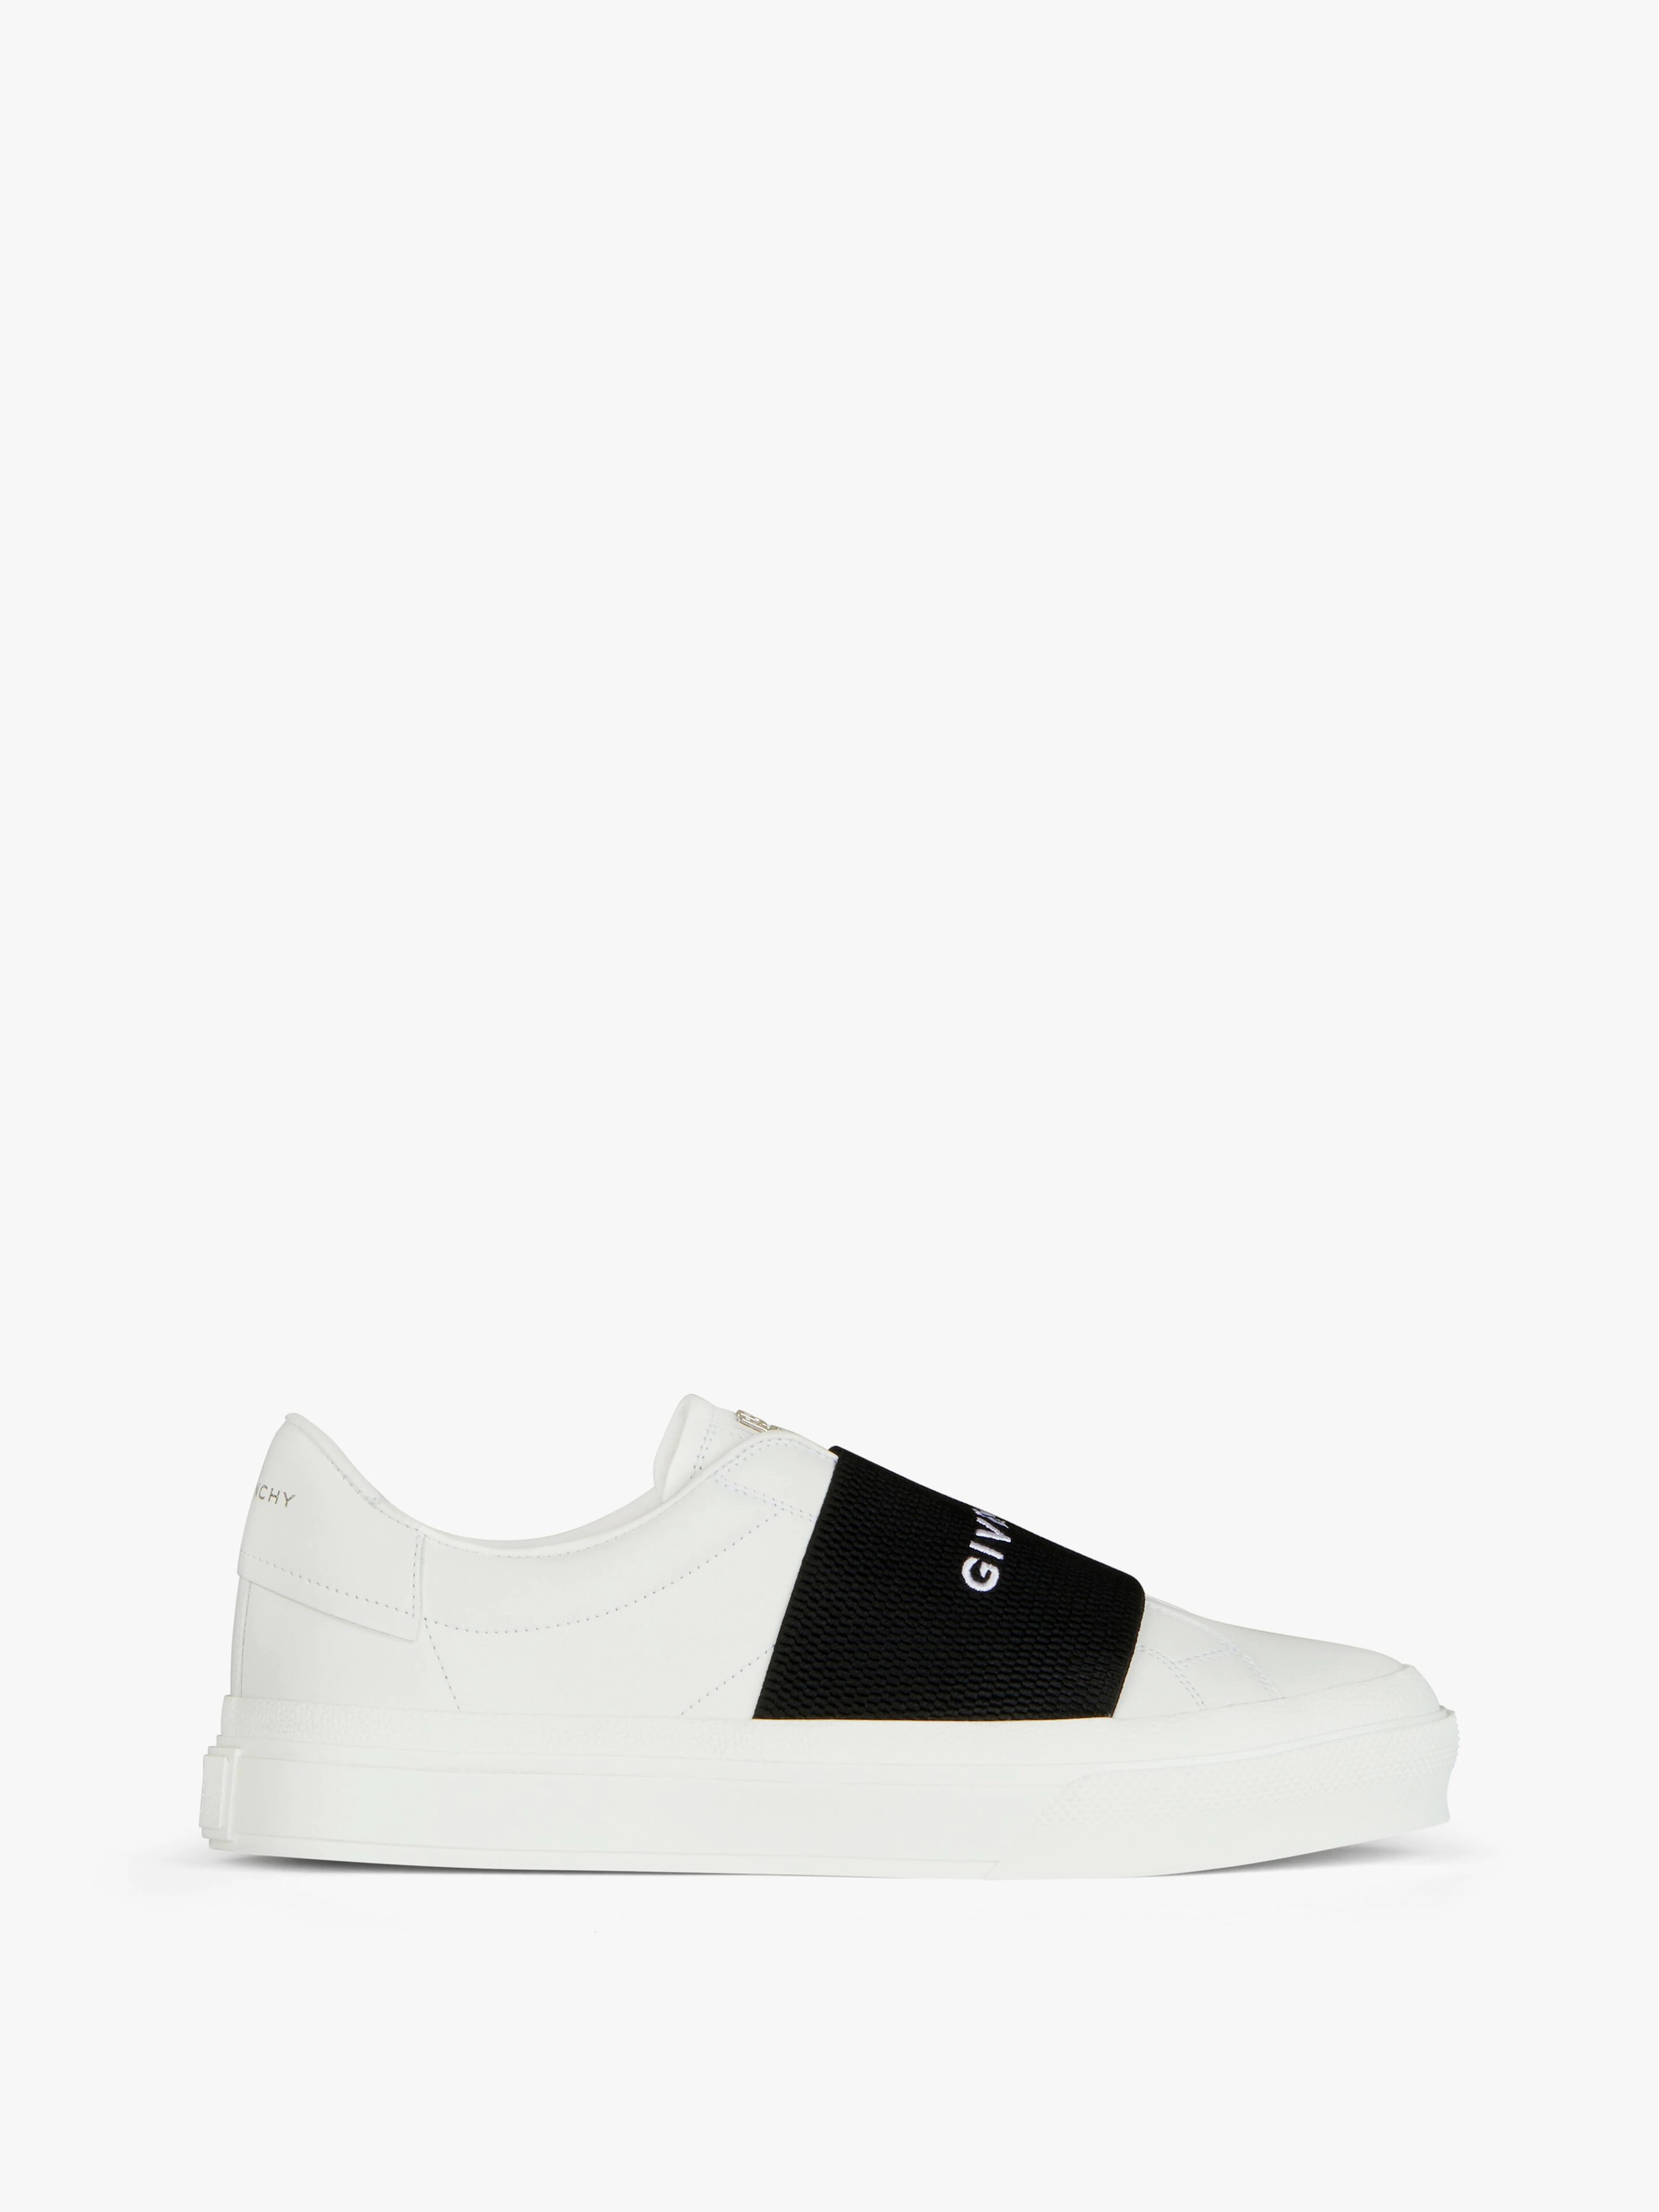 CITY SPORT SNEAKERS IN LEATHER WITH GIVENCHY STRAP - 1